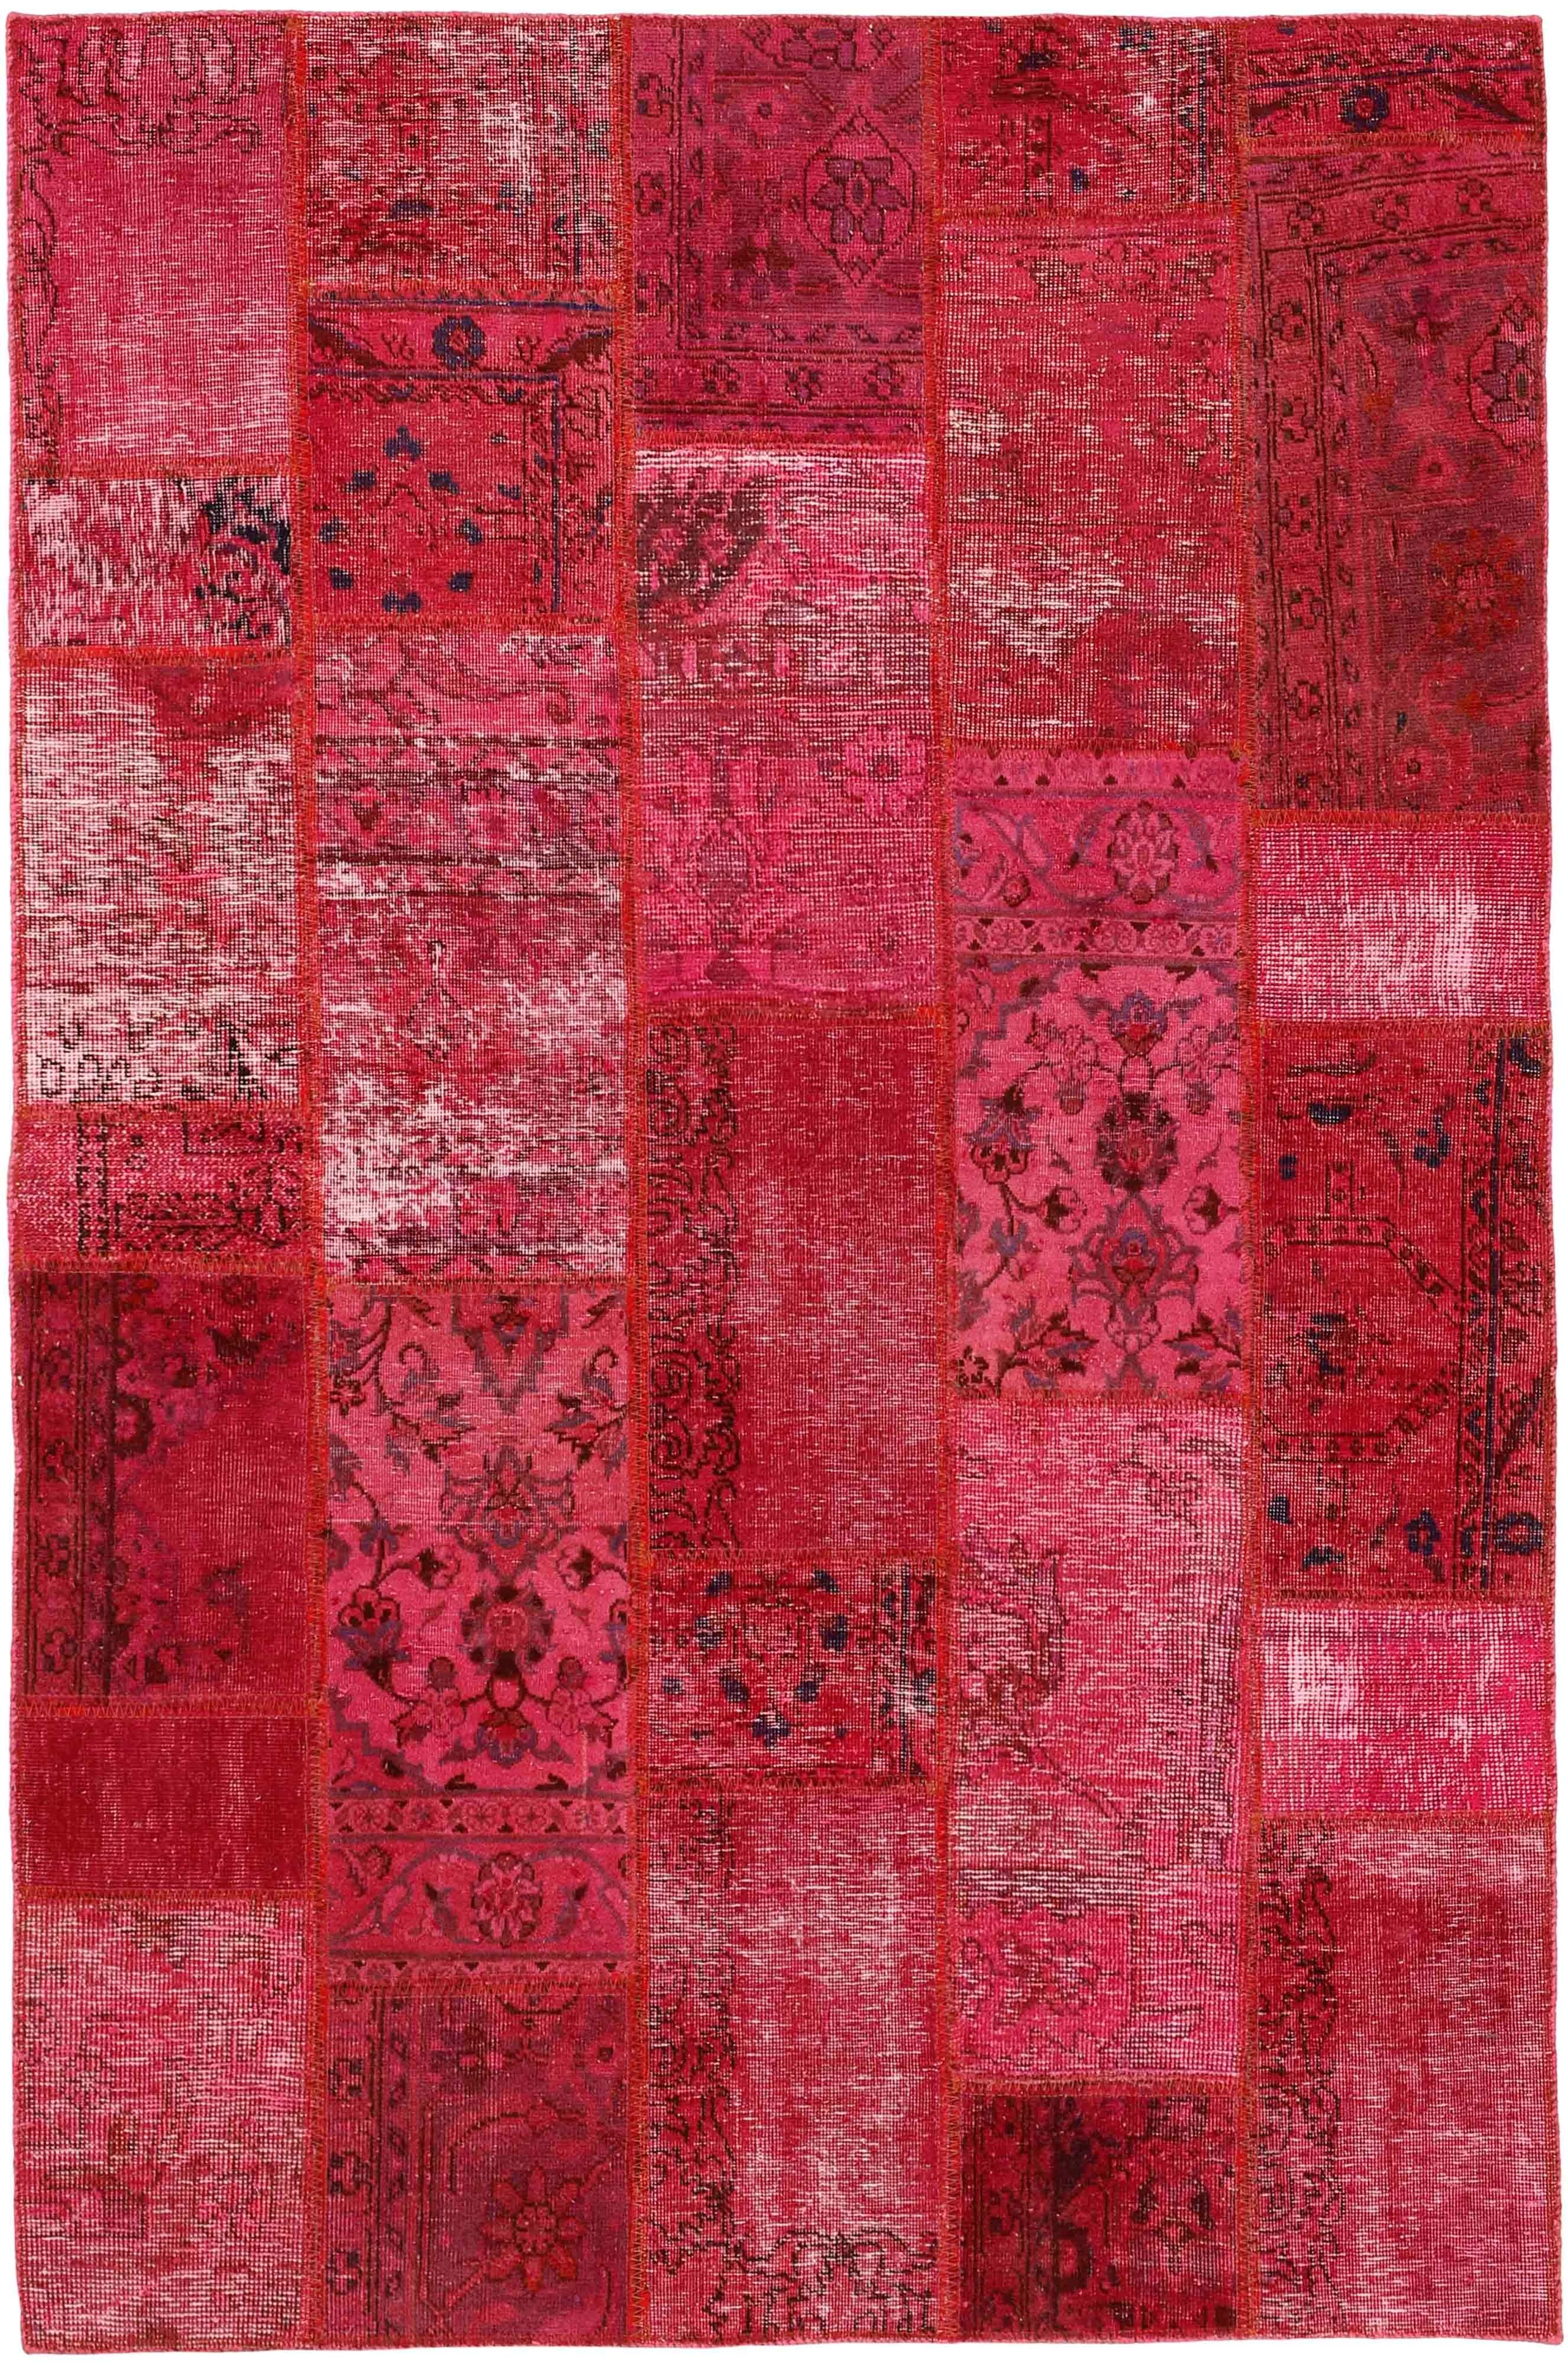 Authentic pink patchwork persian rug